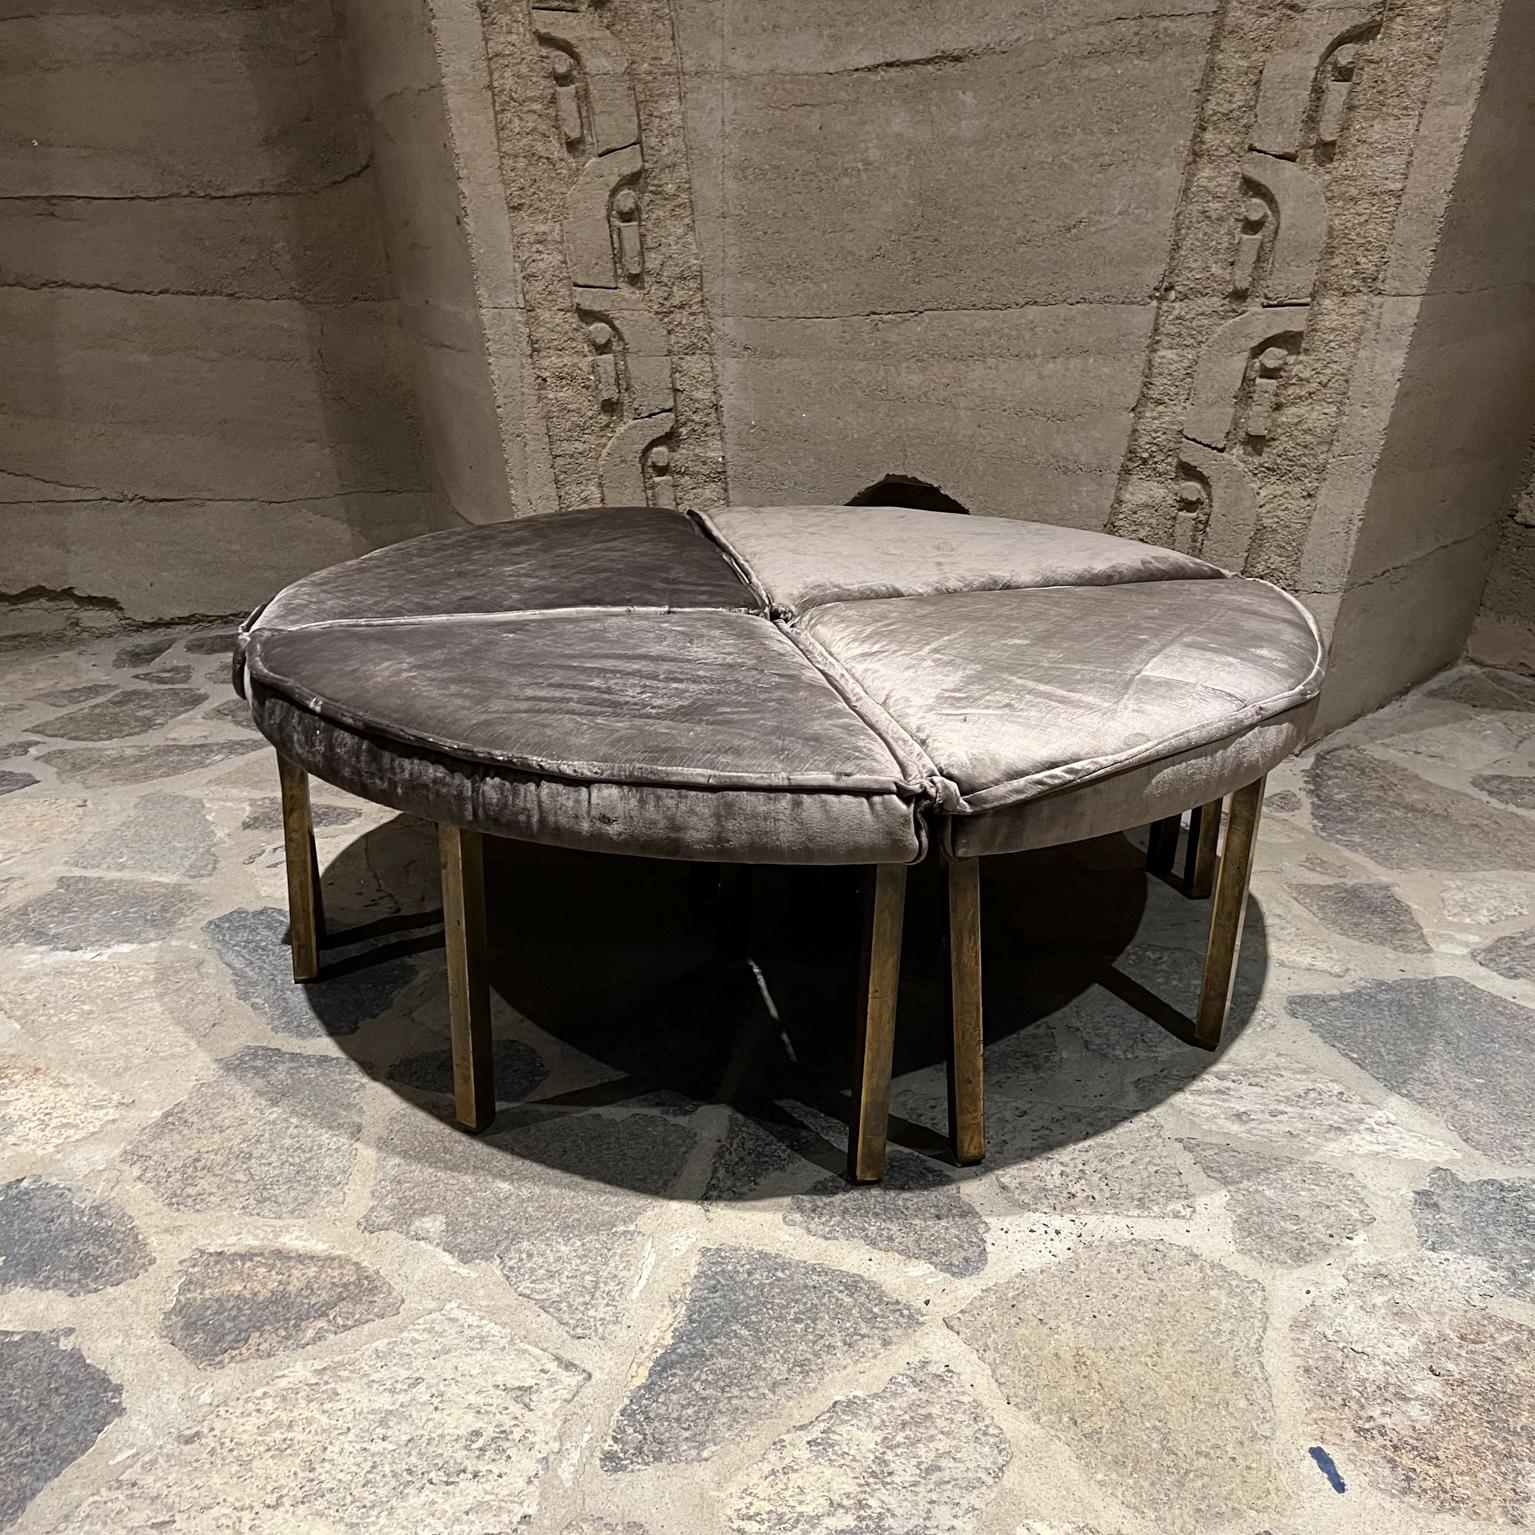 1960s round gray bench four triangular sections
Velvet on square bronze Lucite legs
unmarked, style of Edward Wormley Dunbar USA
15.5 height x 34 in diameter.
Fresh new upholstery- ready to go!
Preowned original vintage condition with patina
Lucite